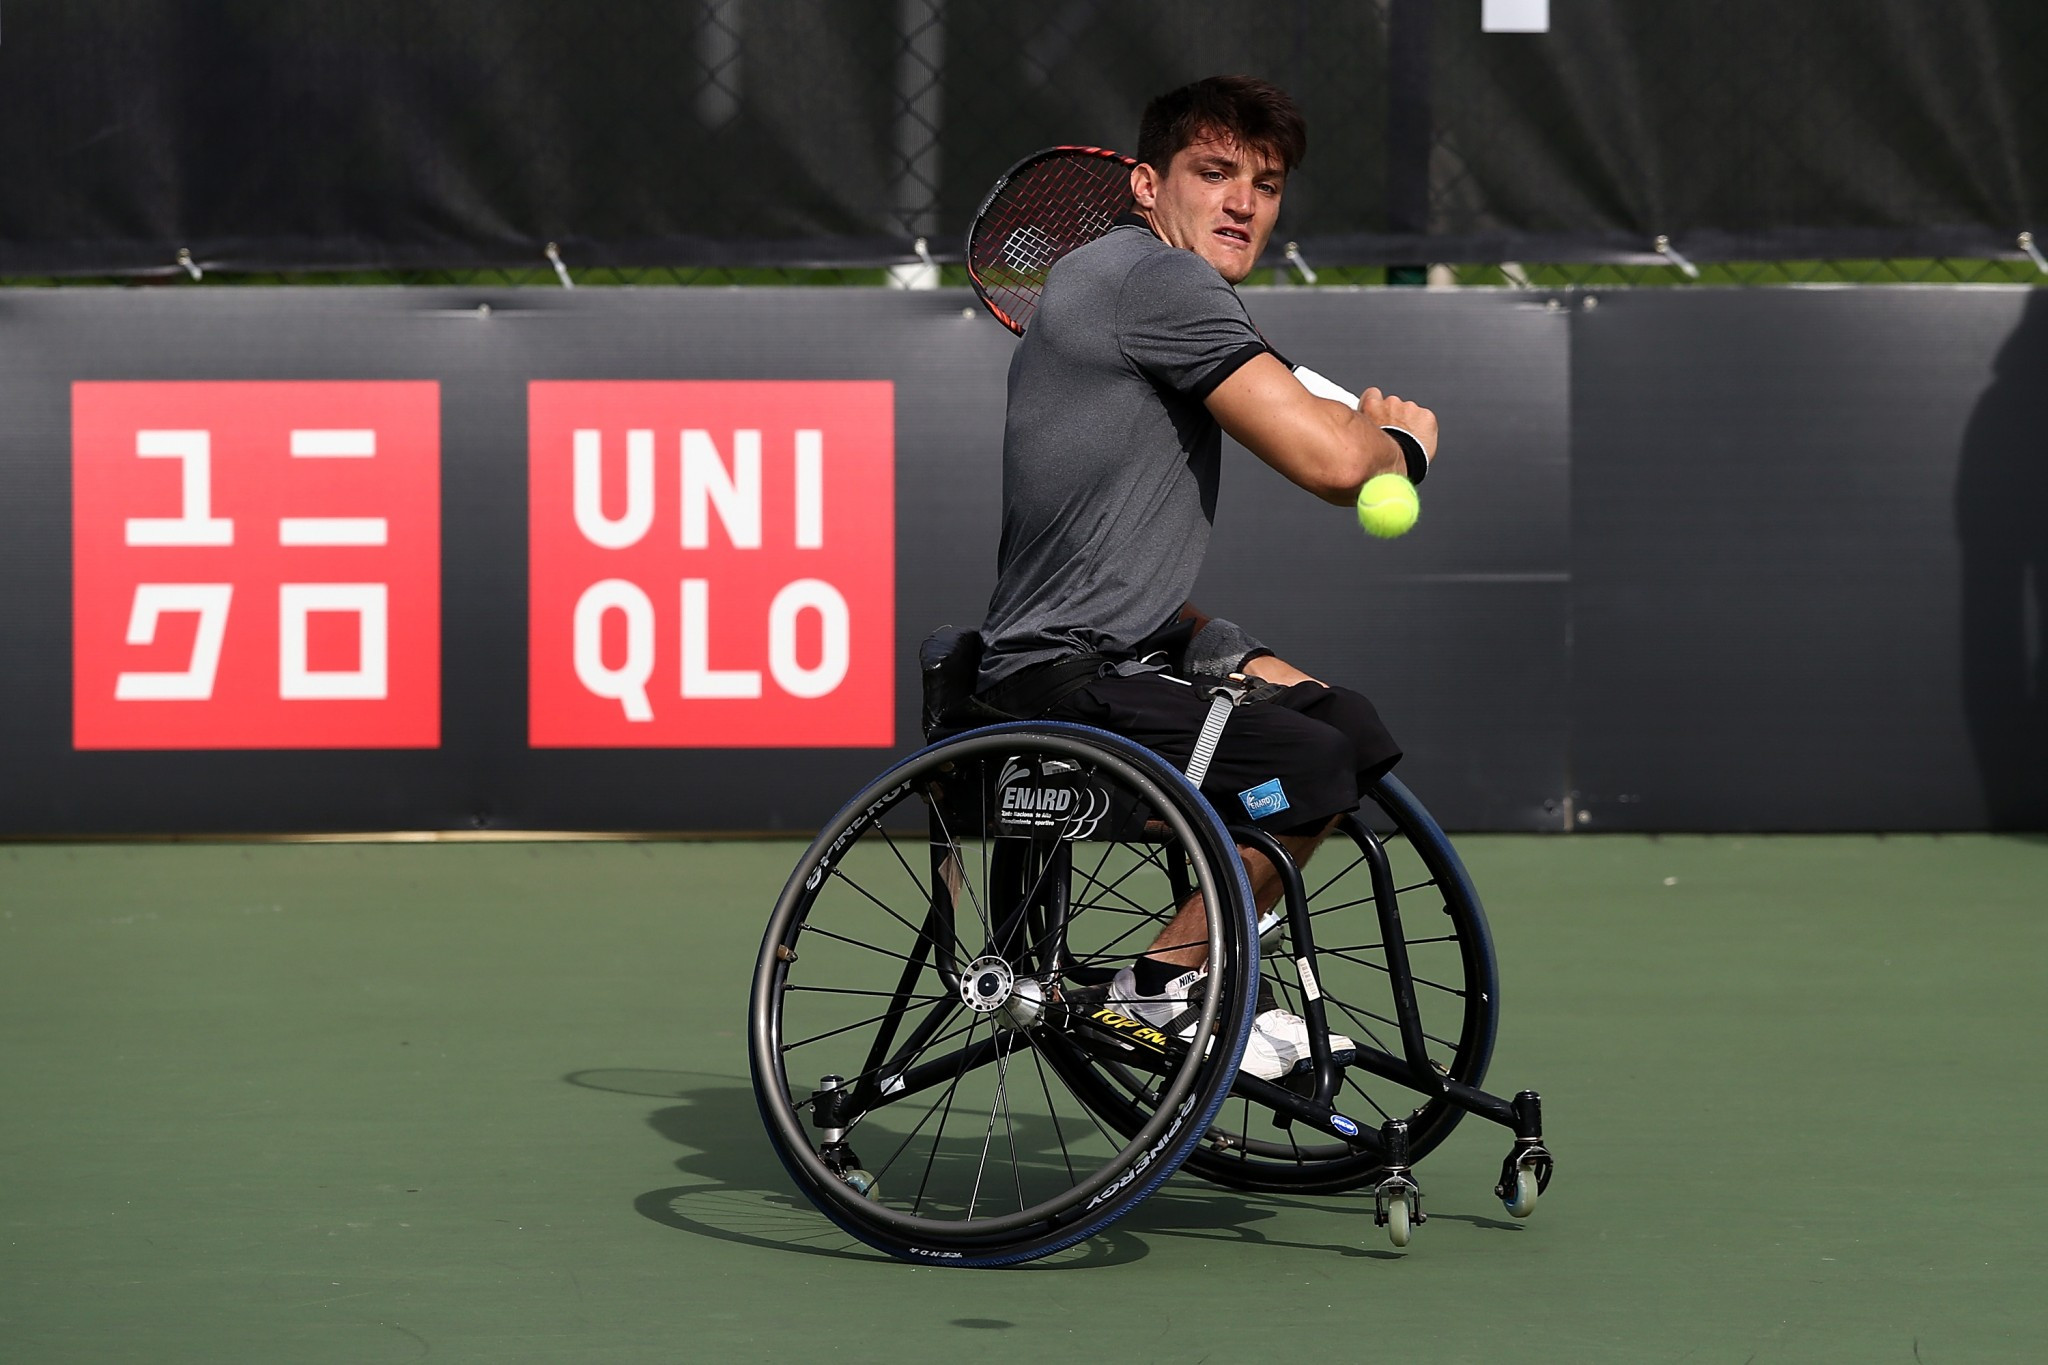 World number one Fernández through to wheelchair men's singles semi-finals at US Open